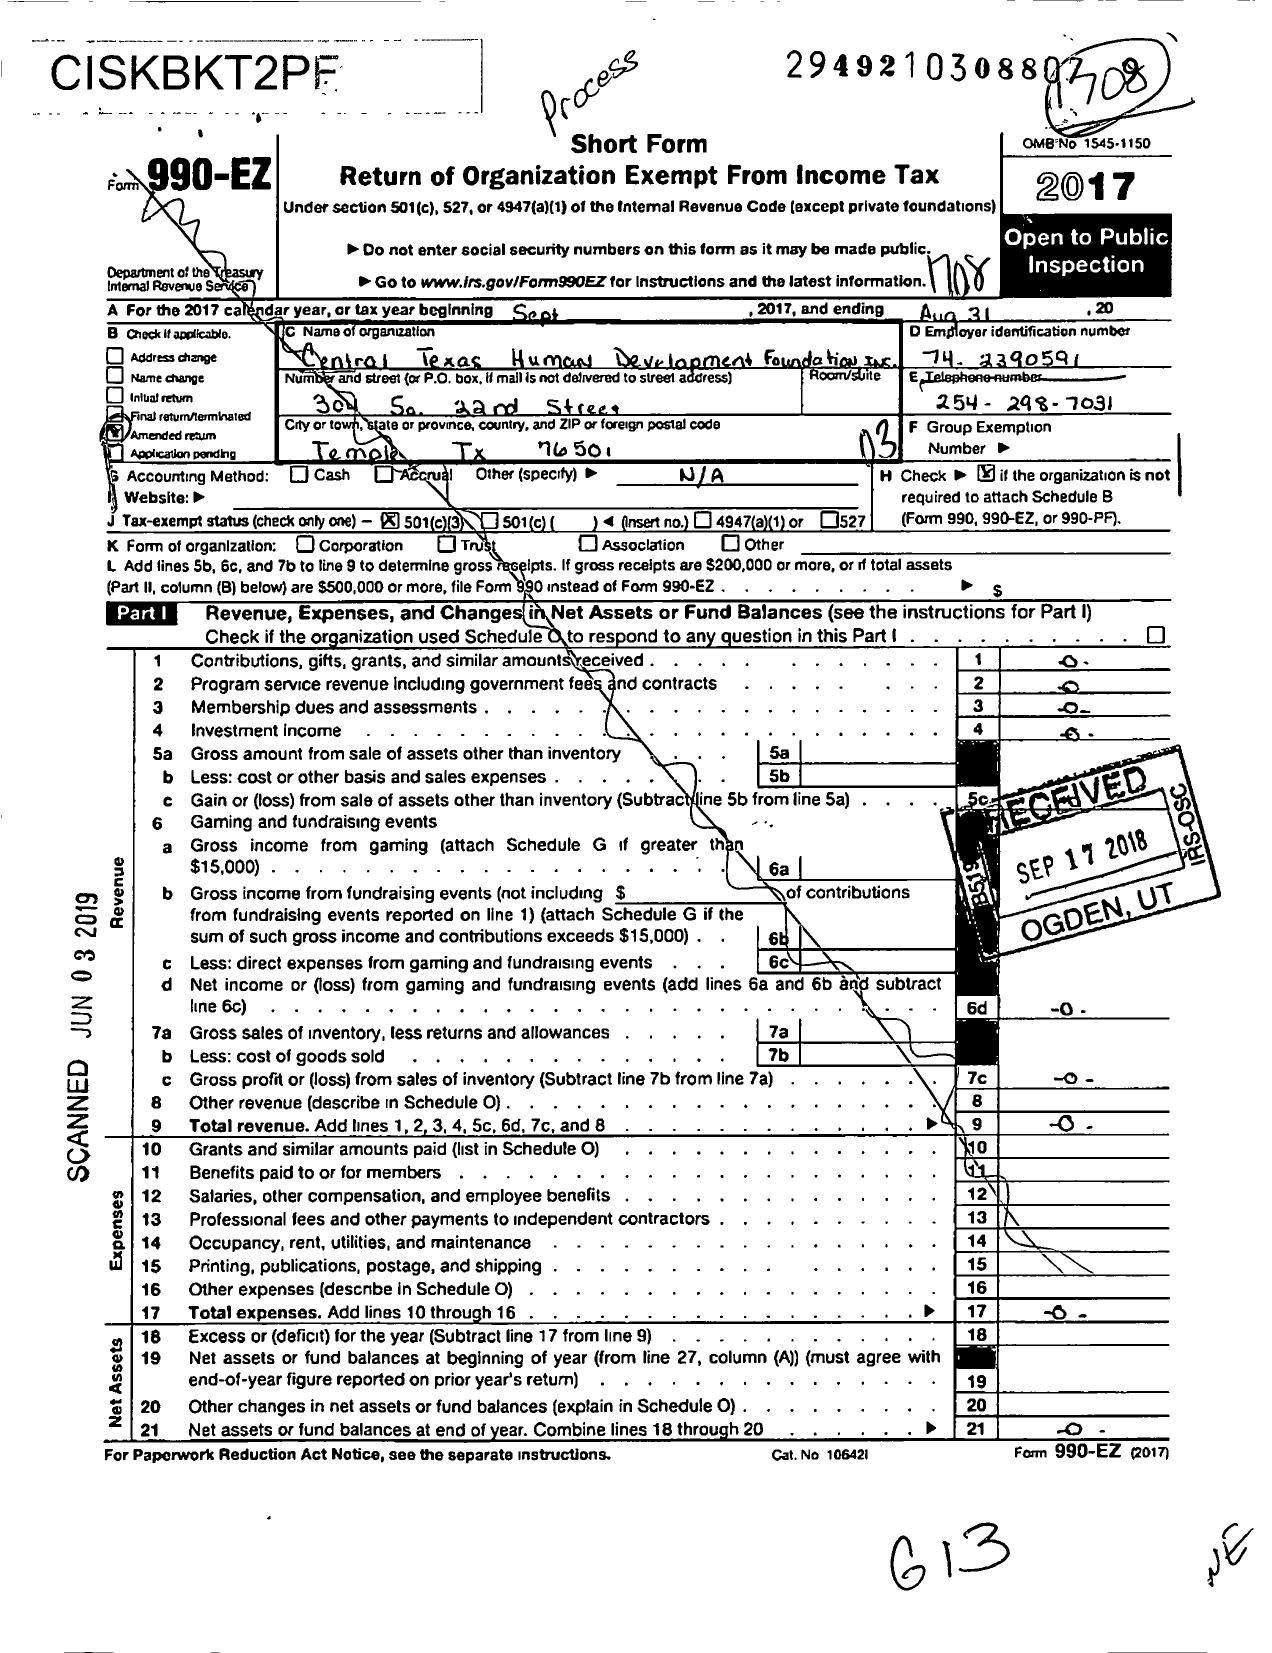 Image of first page of 2016 Form 990EZ for Central Texas Human Development Foundation